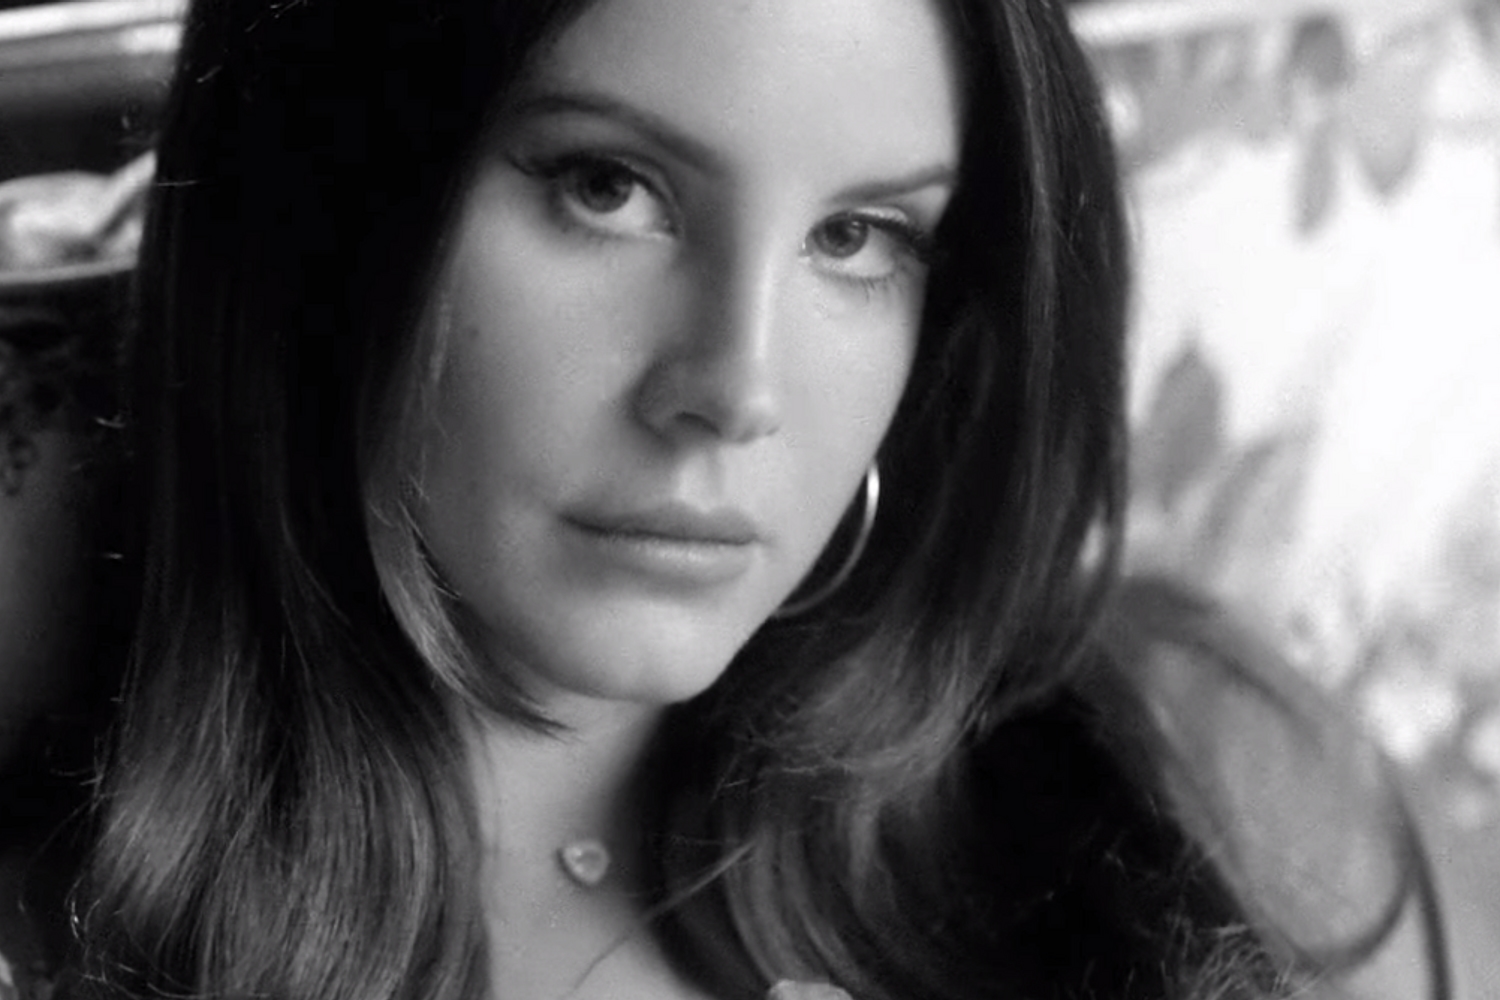 Lana Del Rey is larger than life in new ‘Doin’ Time’ video